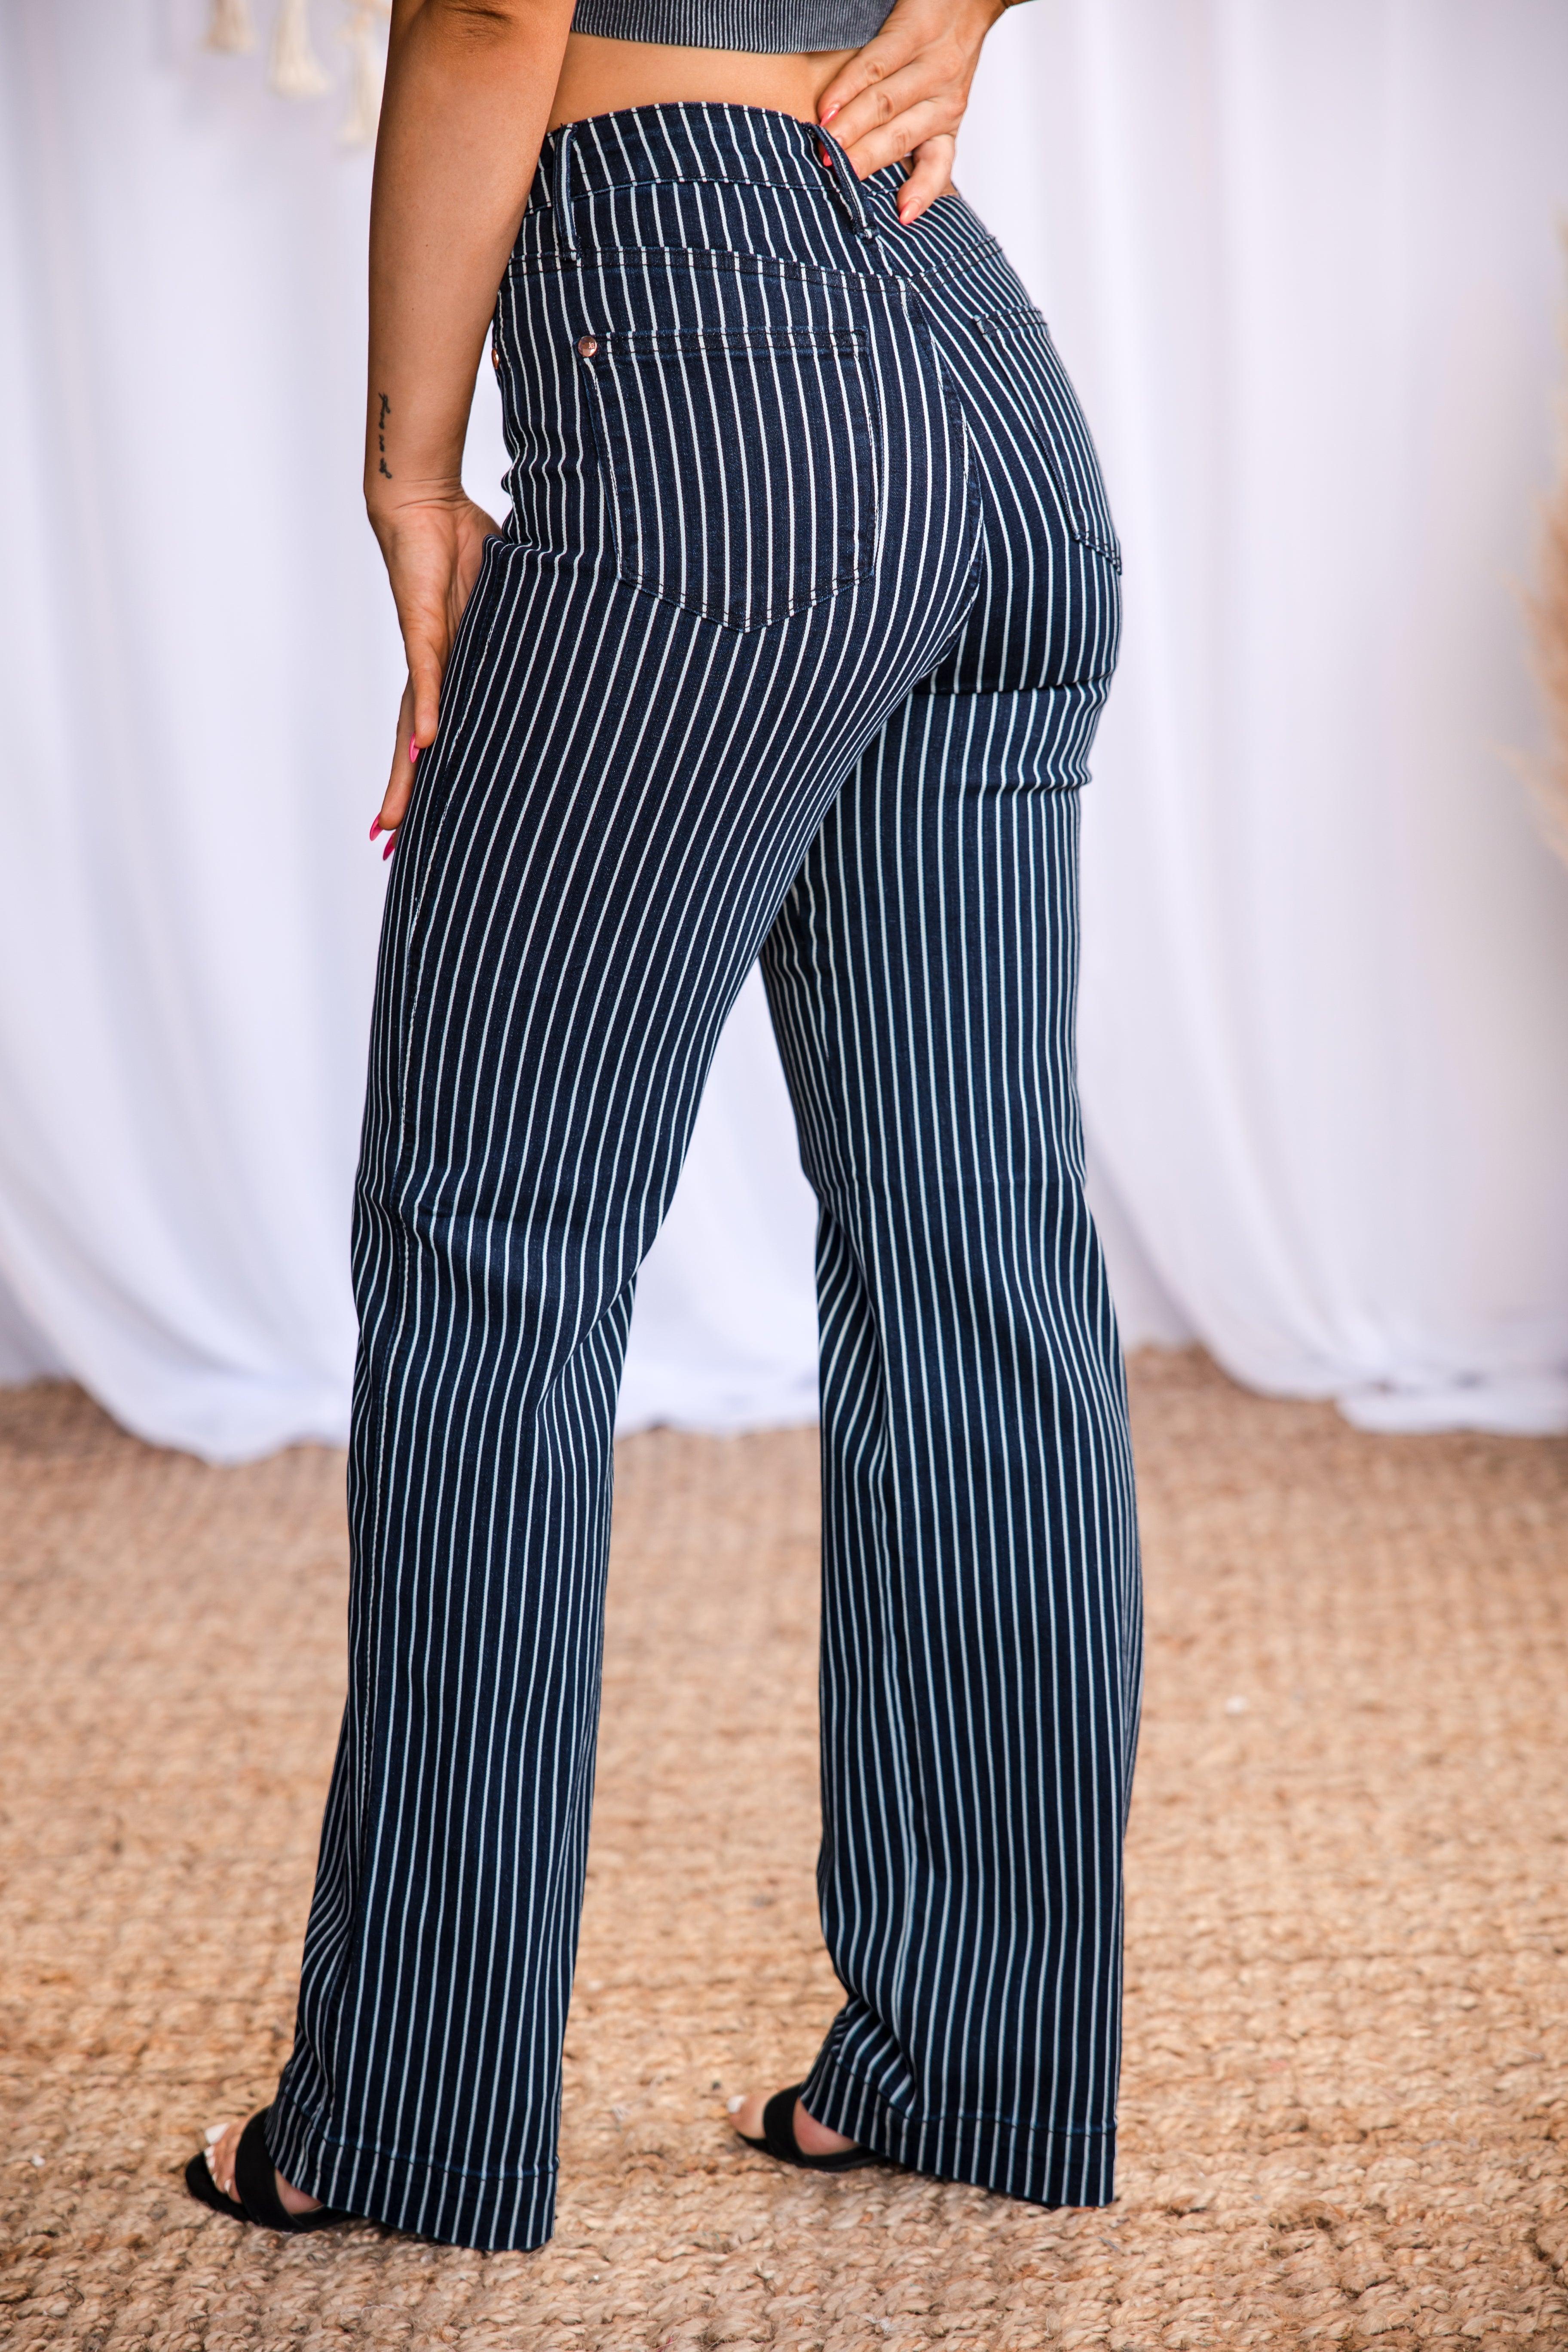 Pinstriped Diva - Tummy Control Judy Blues Giftmas Boutique Simplified   